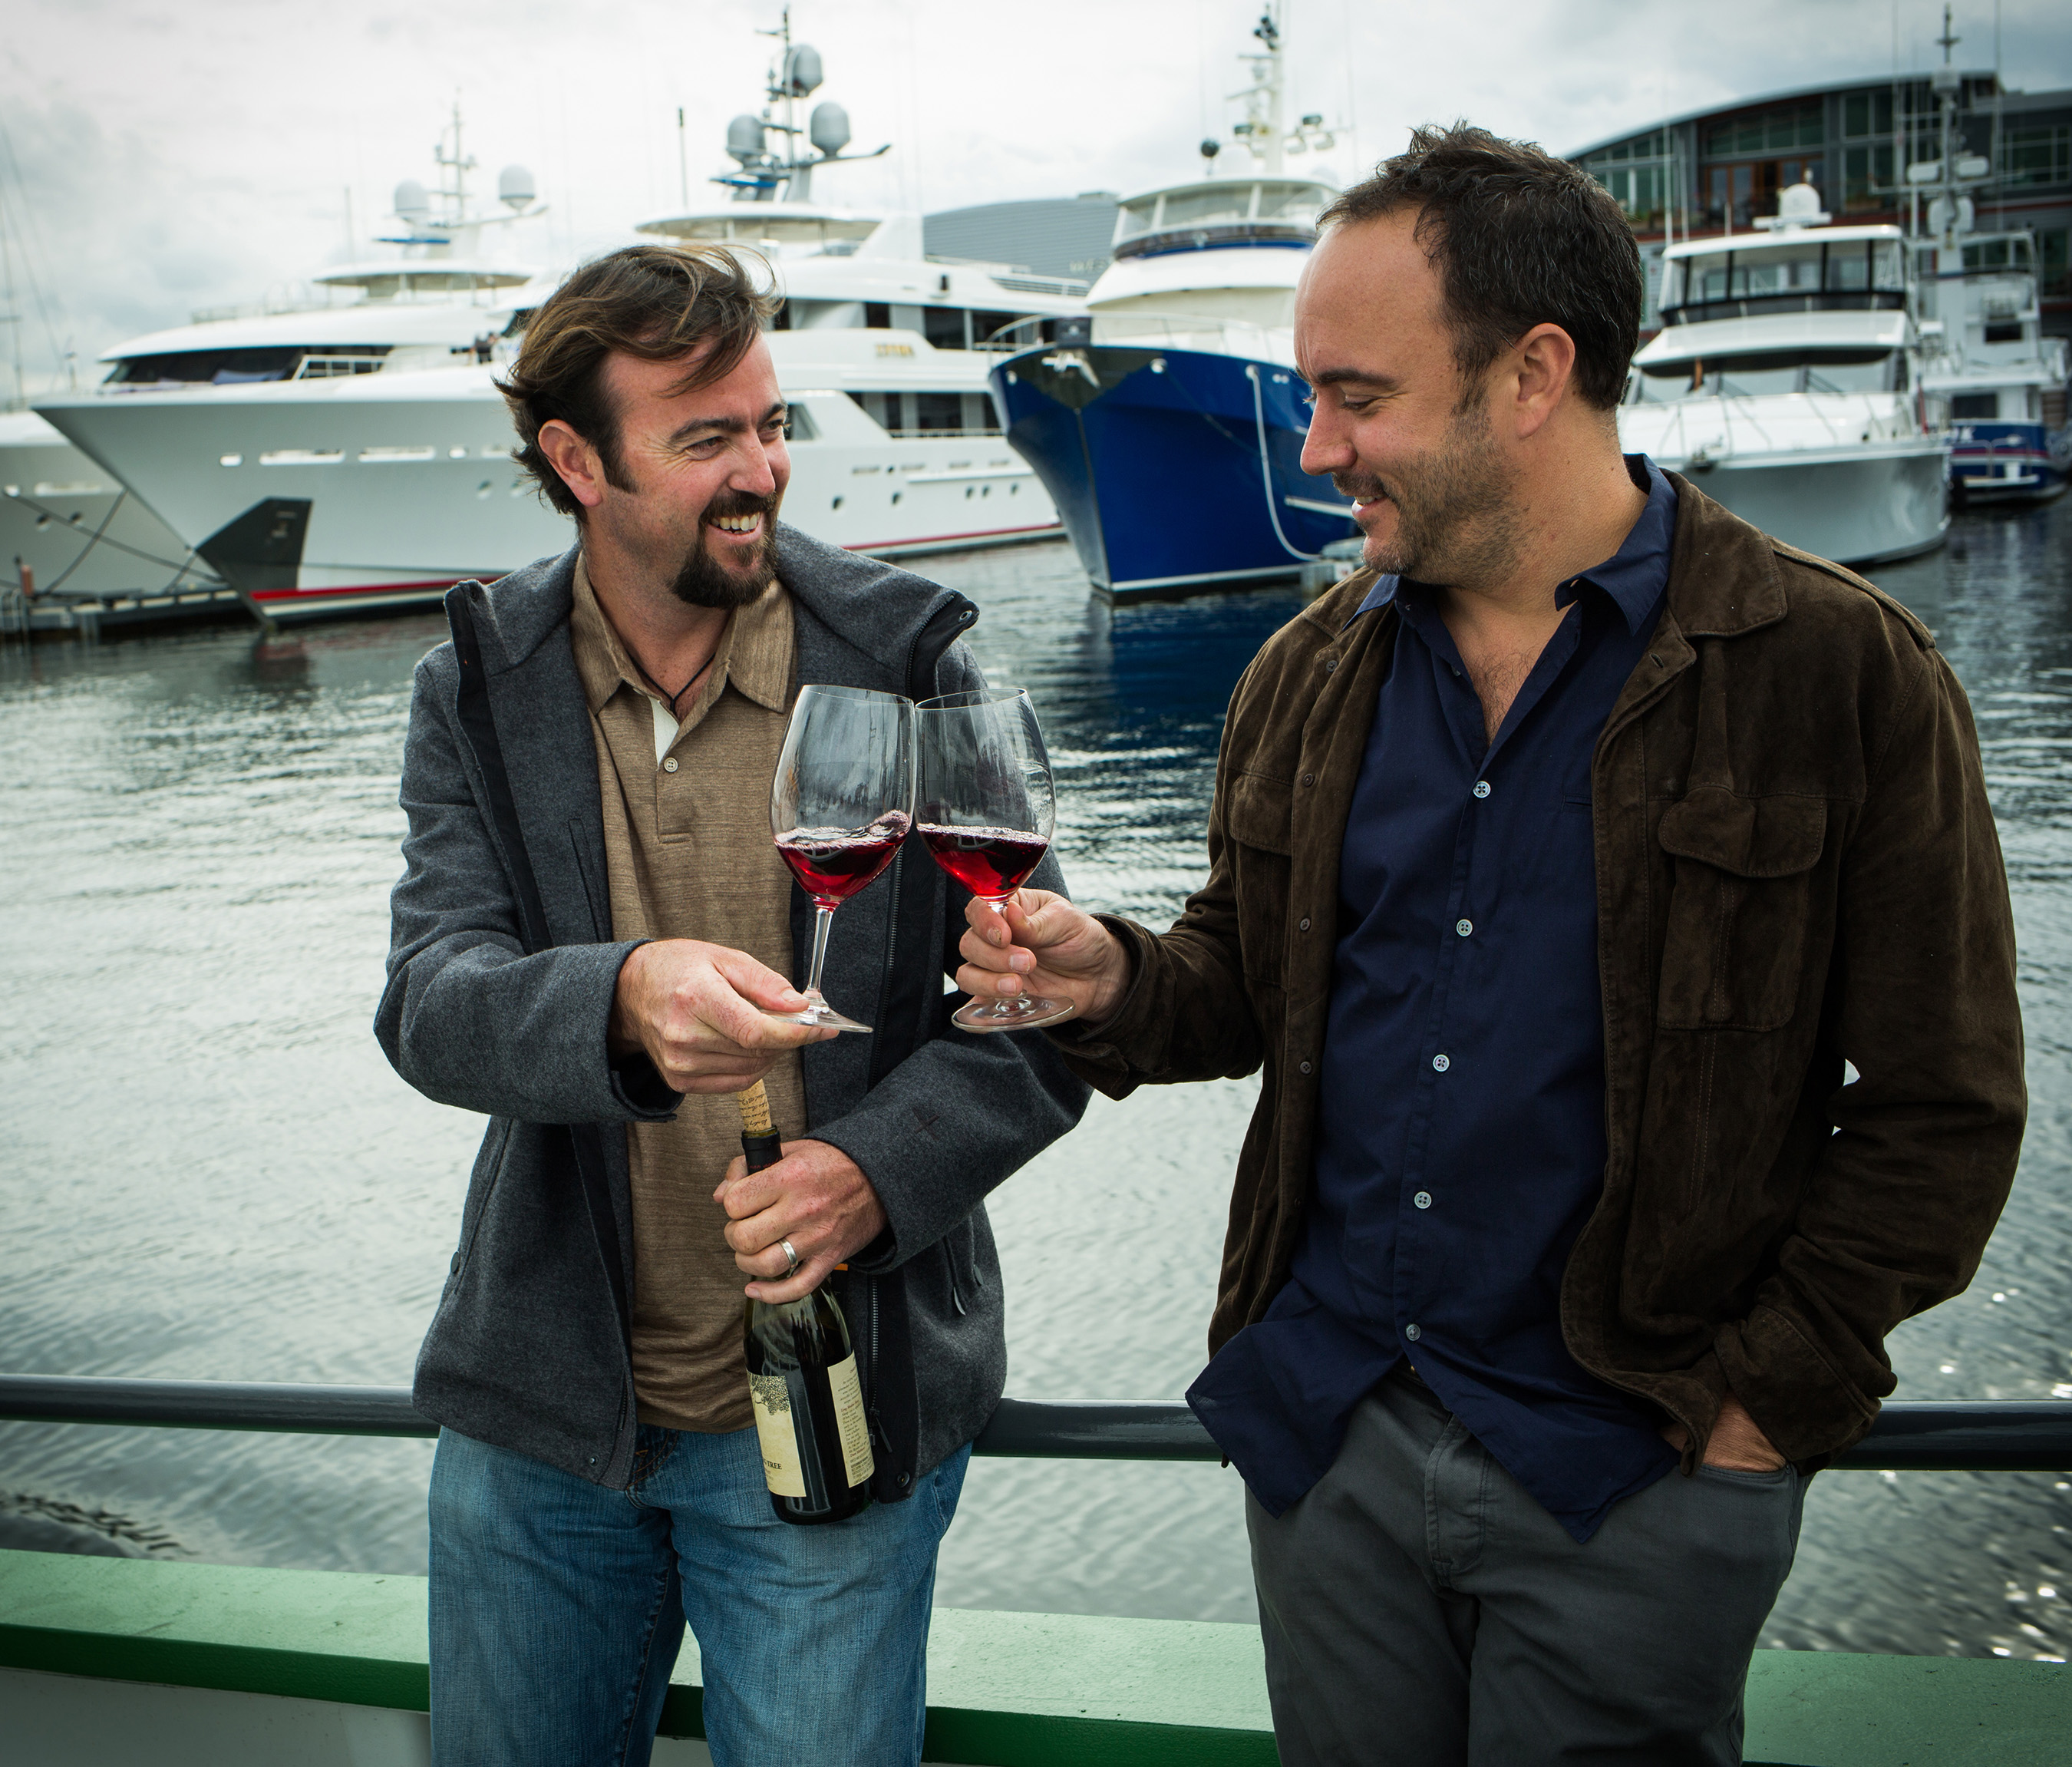 Award-winning winemaker Sean McKenzie and musician Dave Matthews collaborate together on The Dreaming Tree Wines - A California based wine brand.